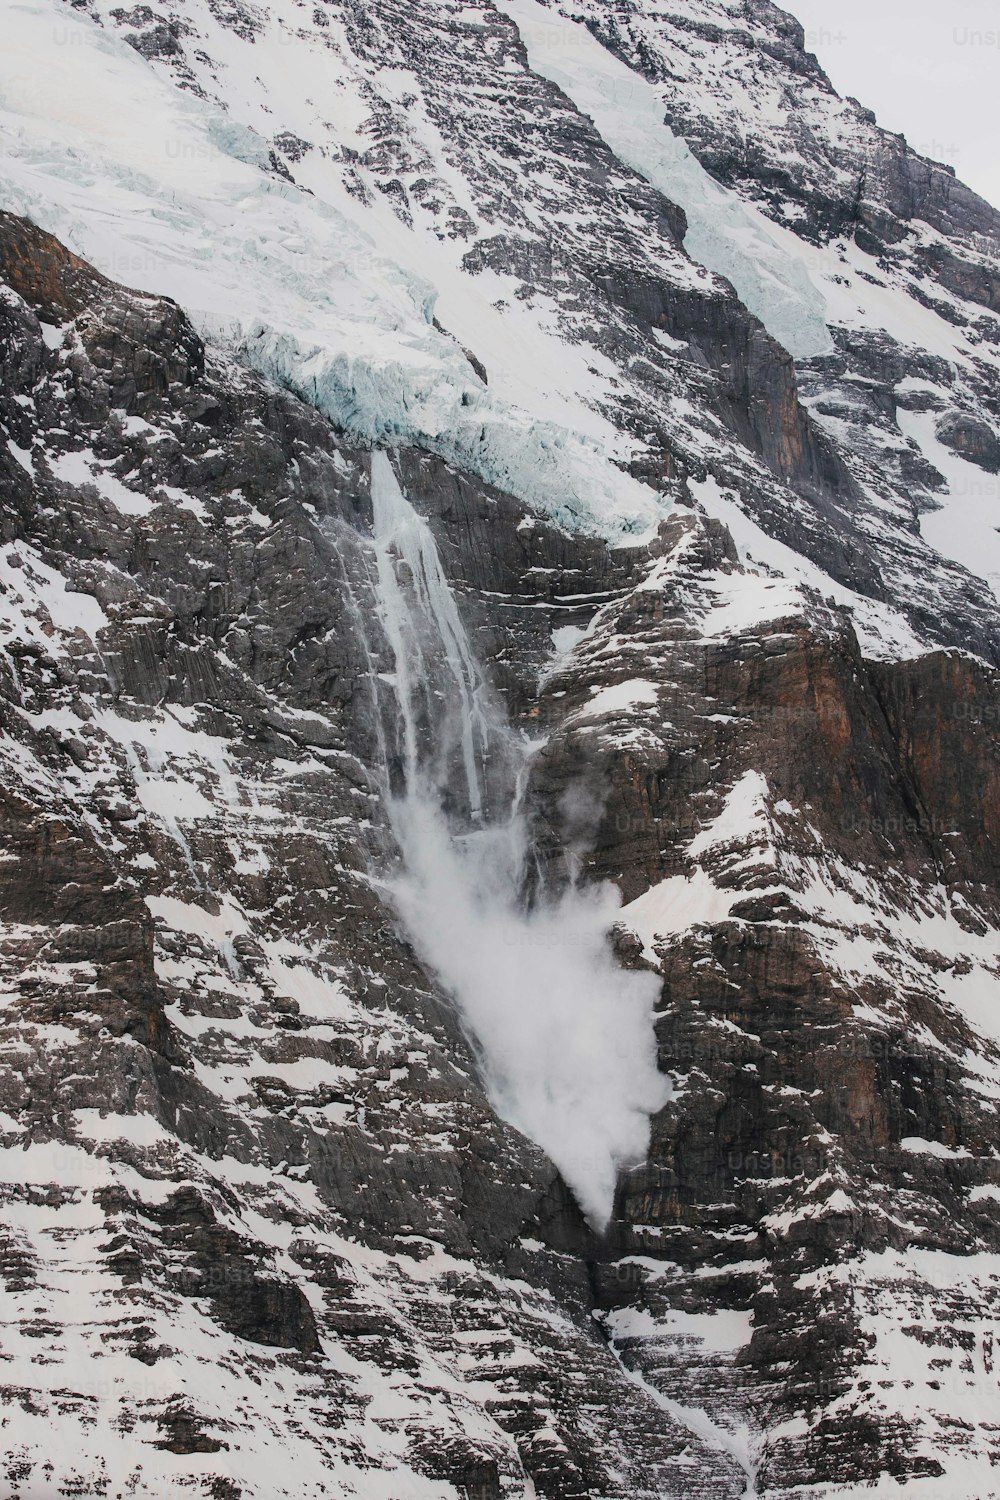 a snow covered mountain with a waterfall coming out of it